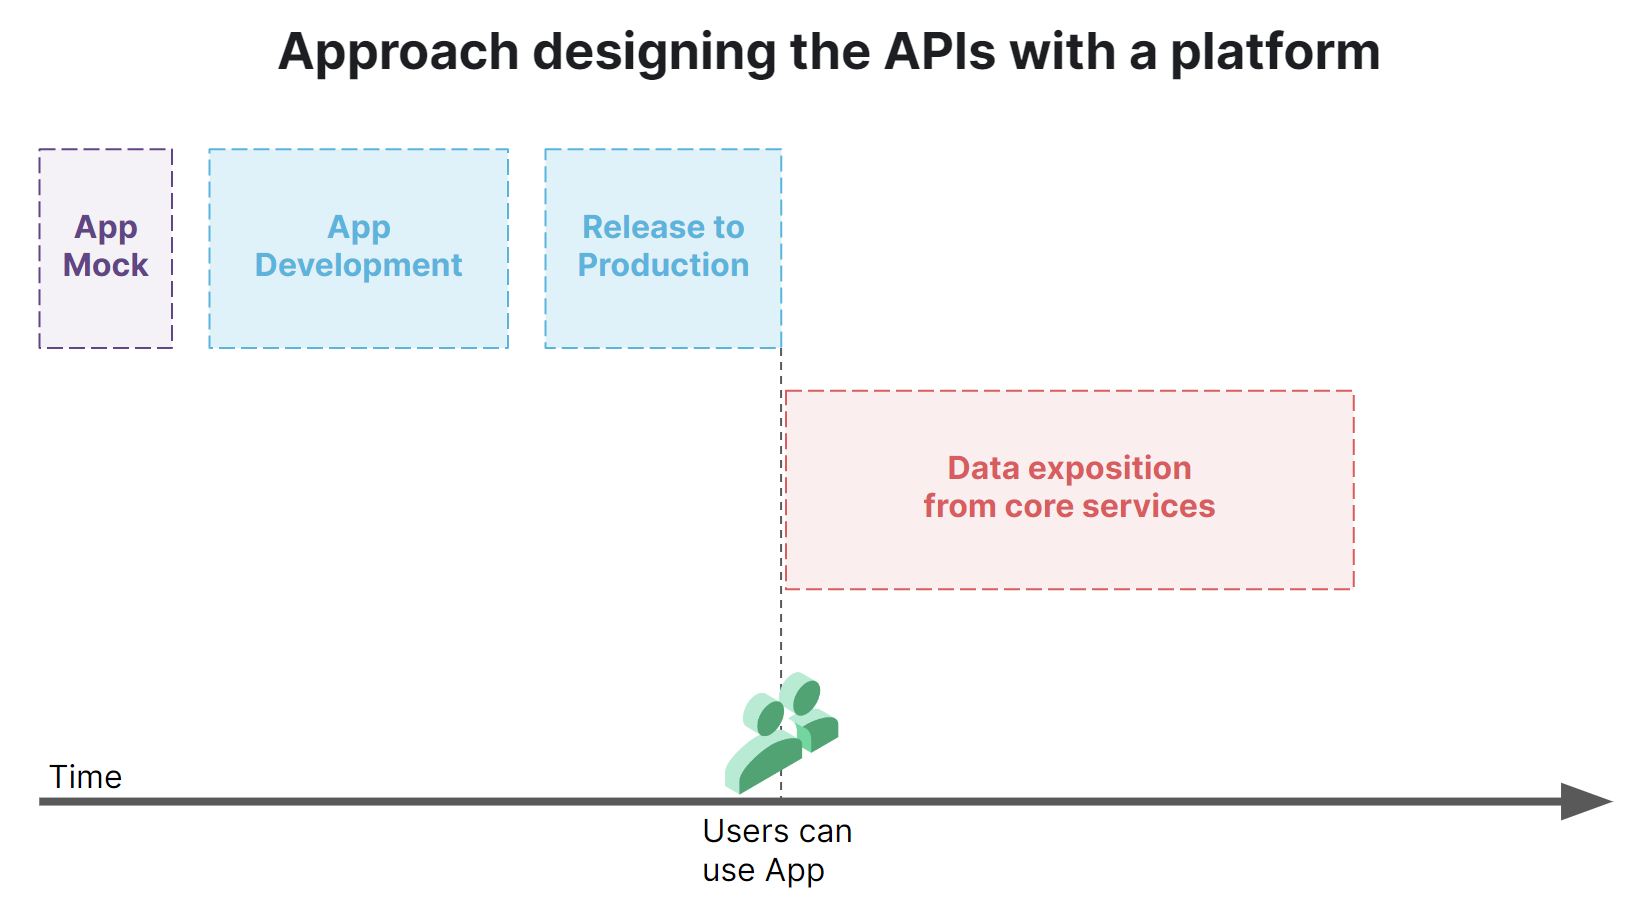 Approach designing APIs with a platform